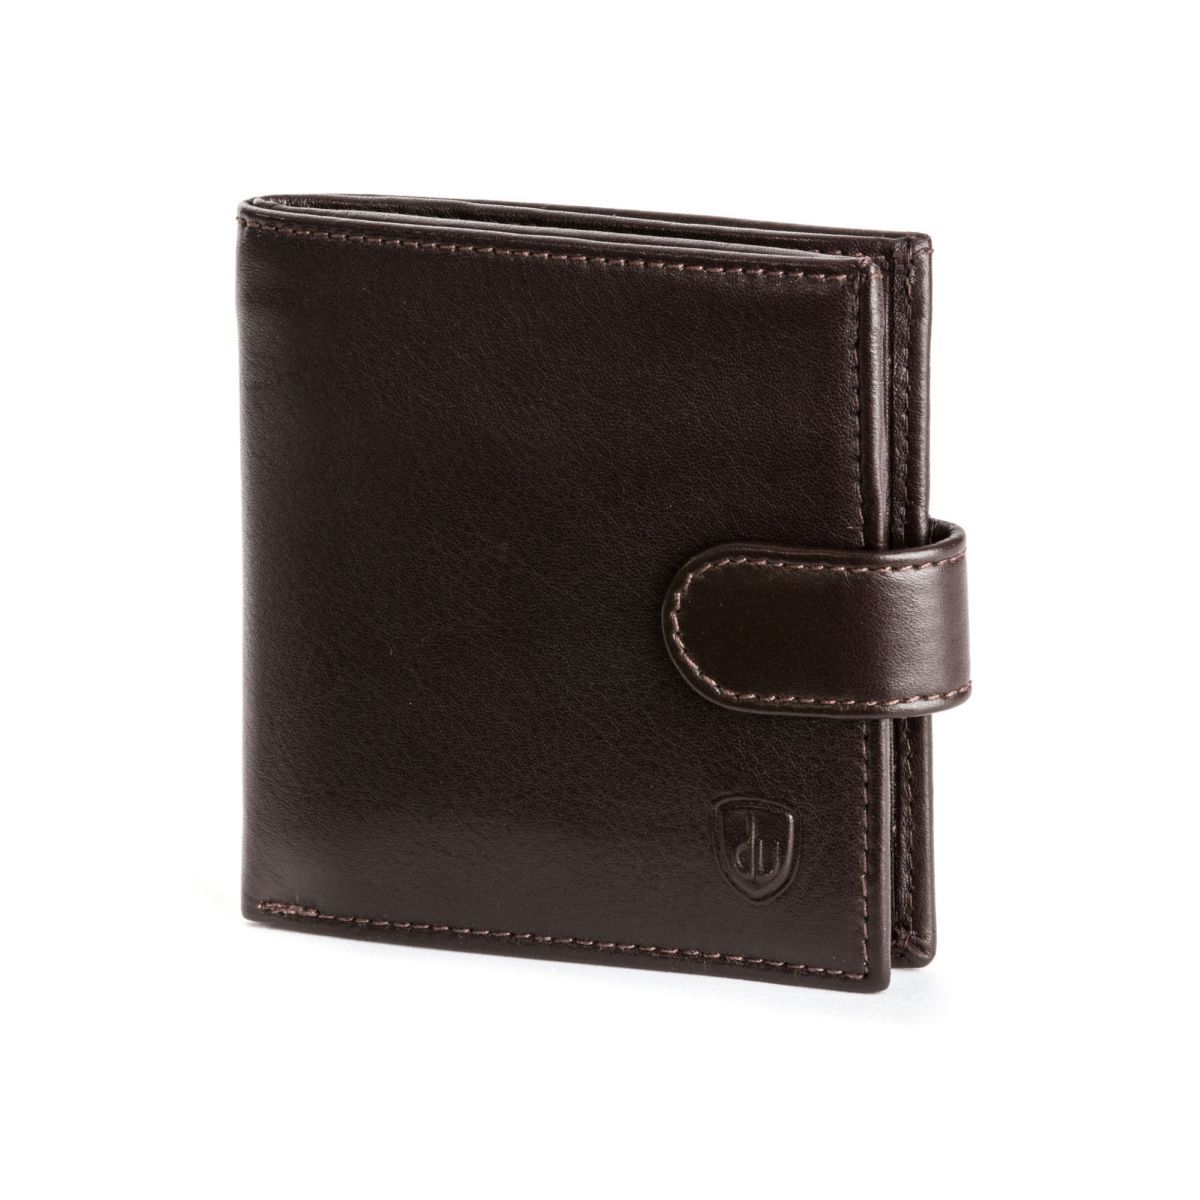 dv Men's Leather Wallet With Snap Closure - Dark Brown